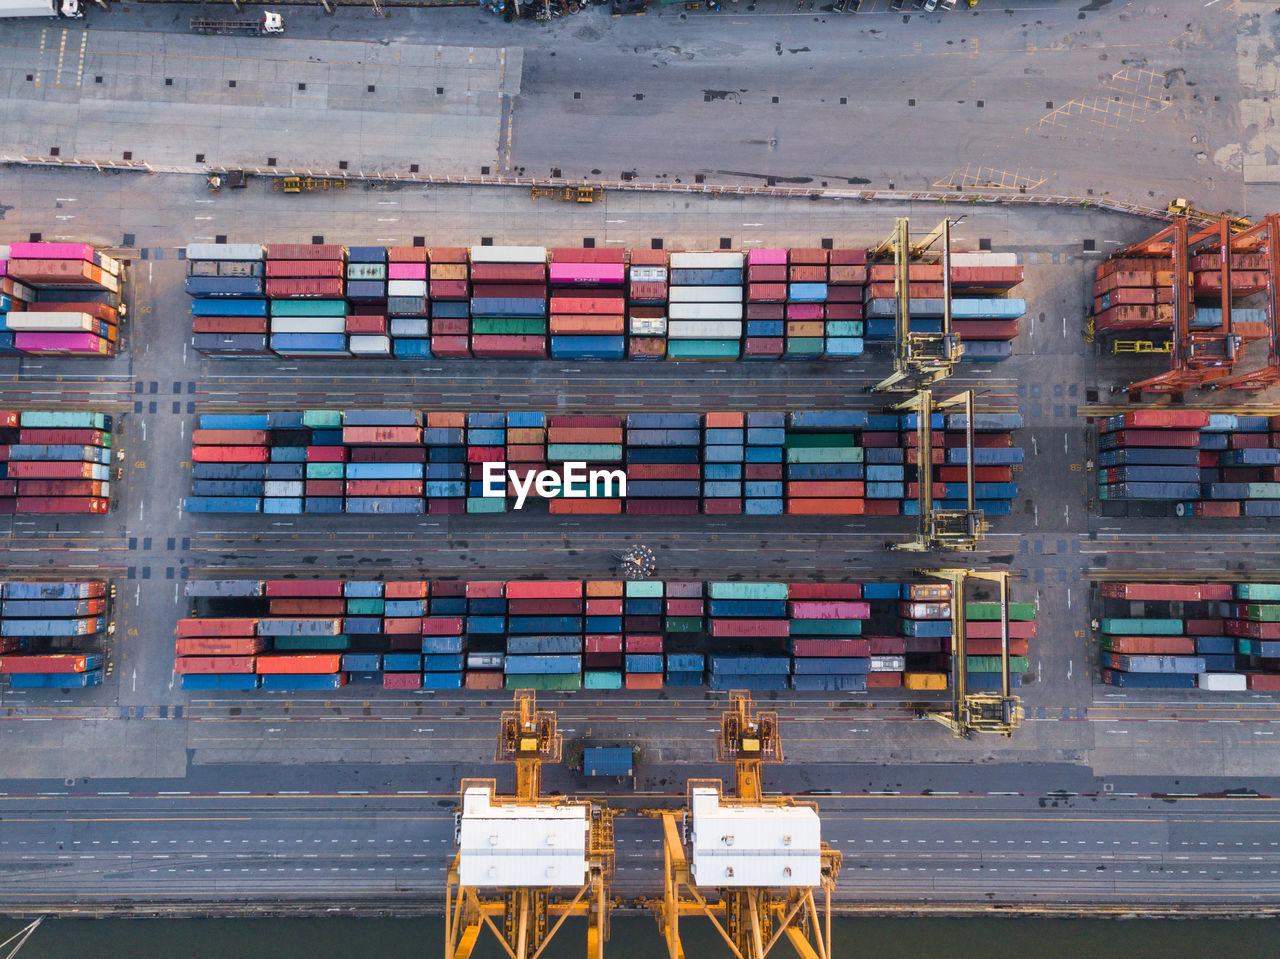 Aerial view of cargo containers at dock